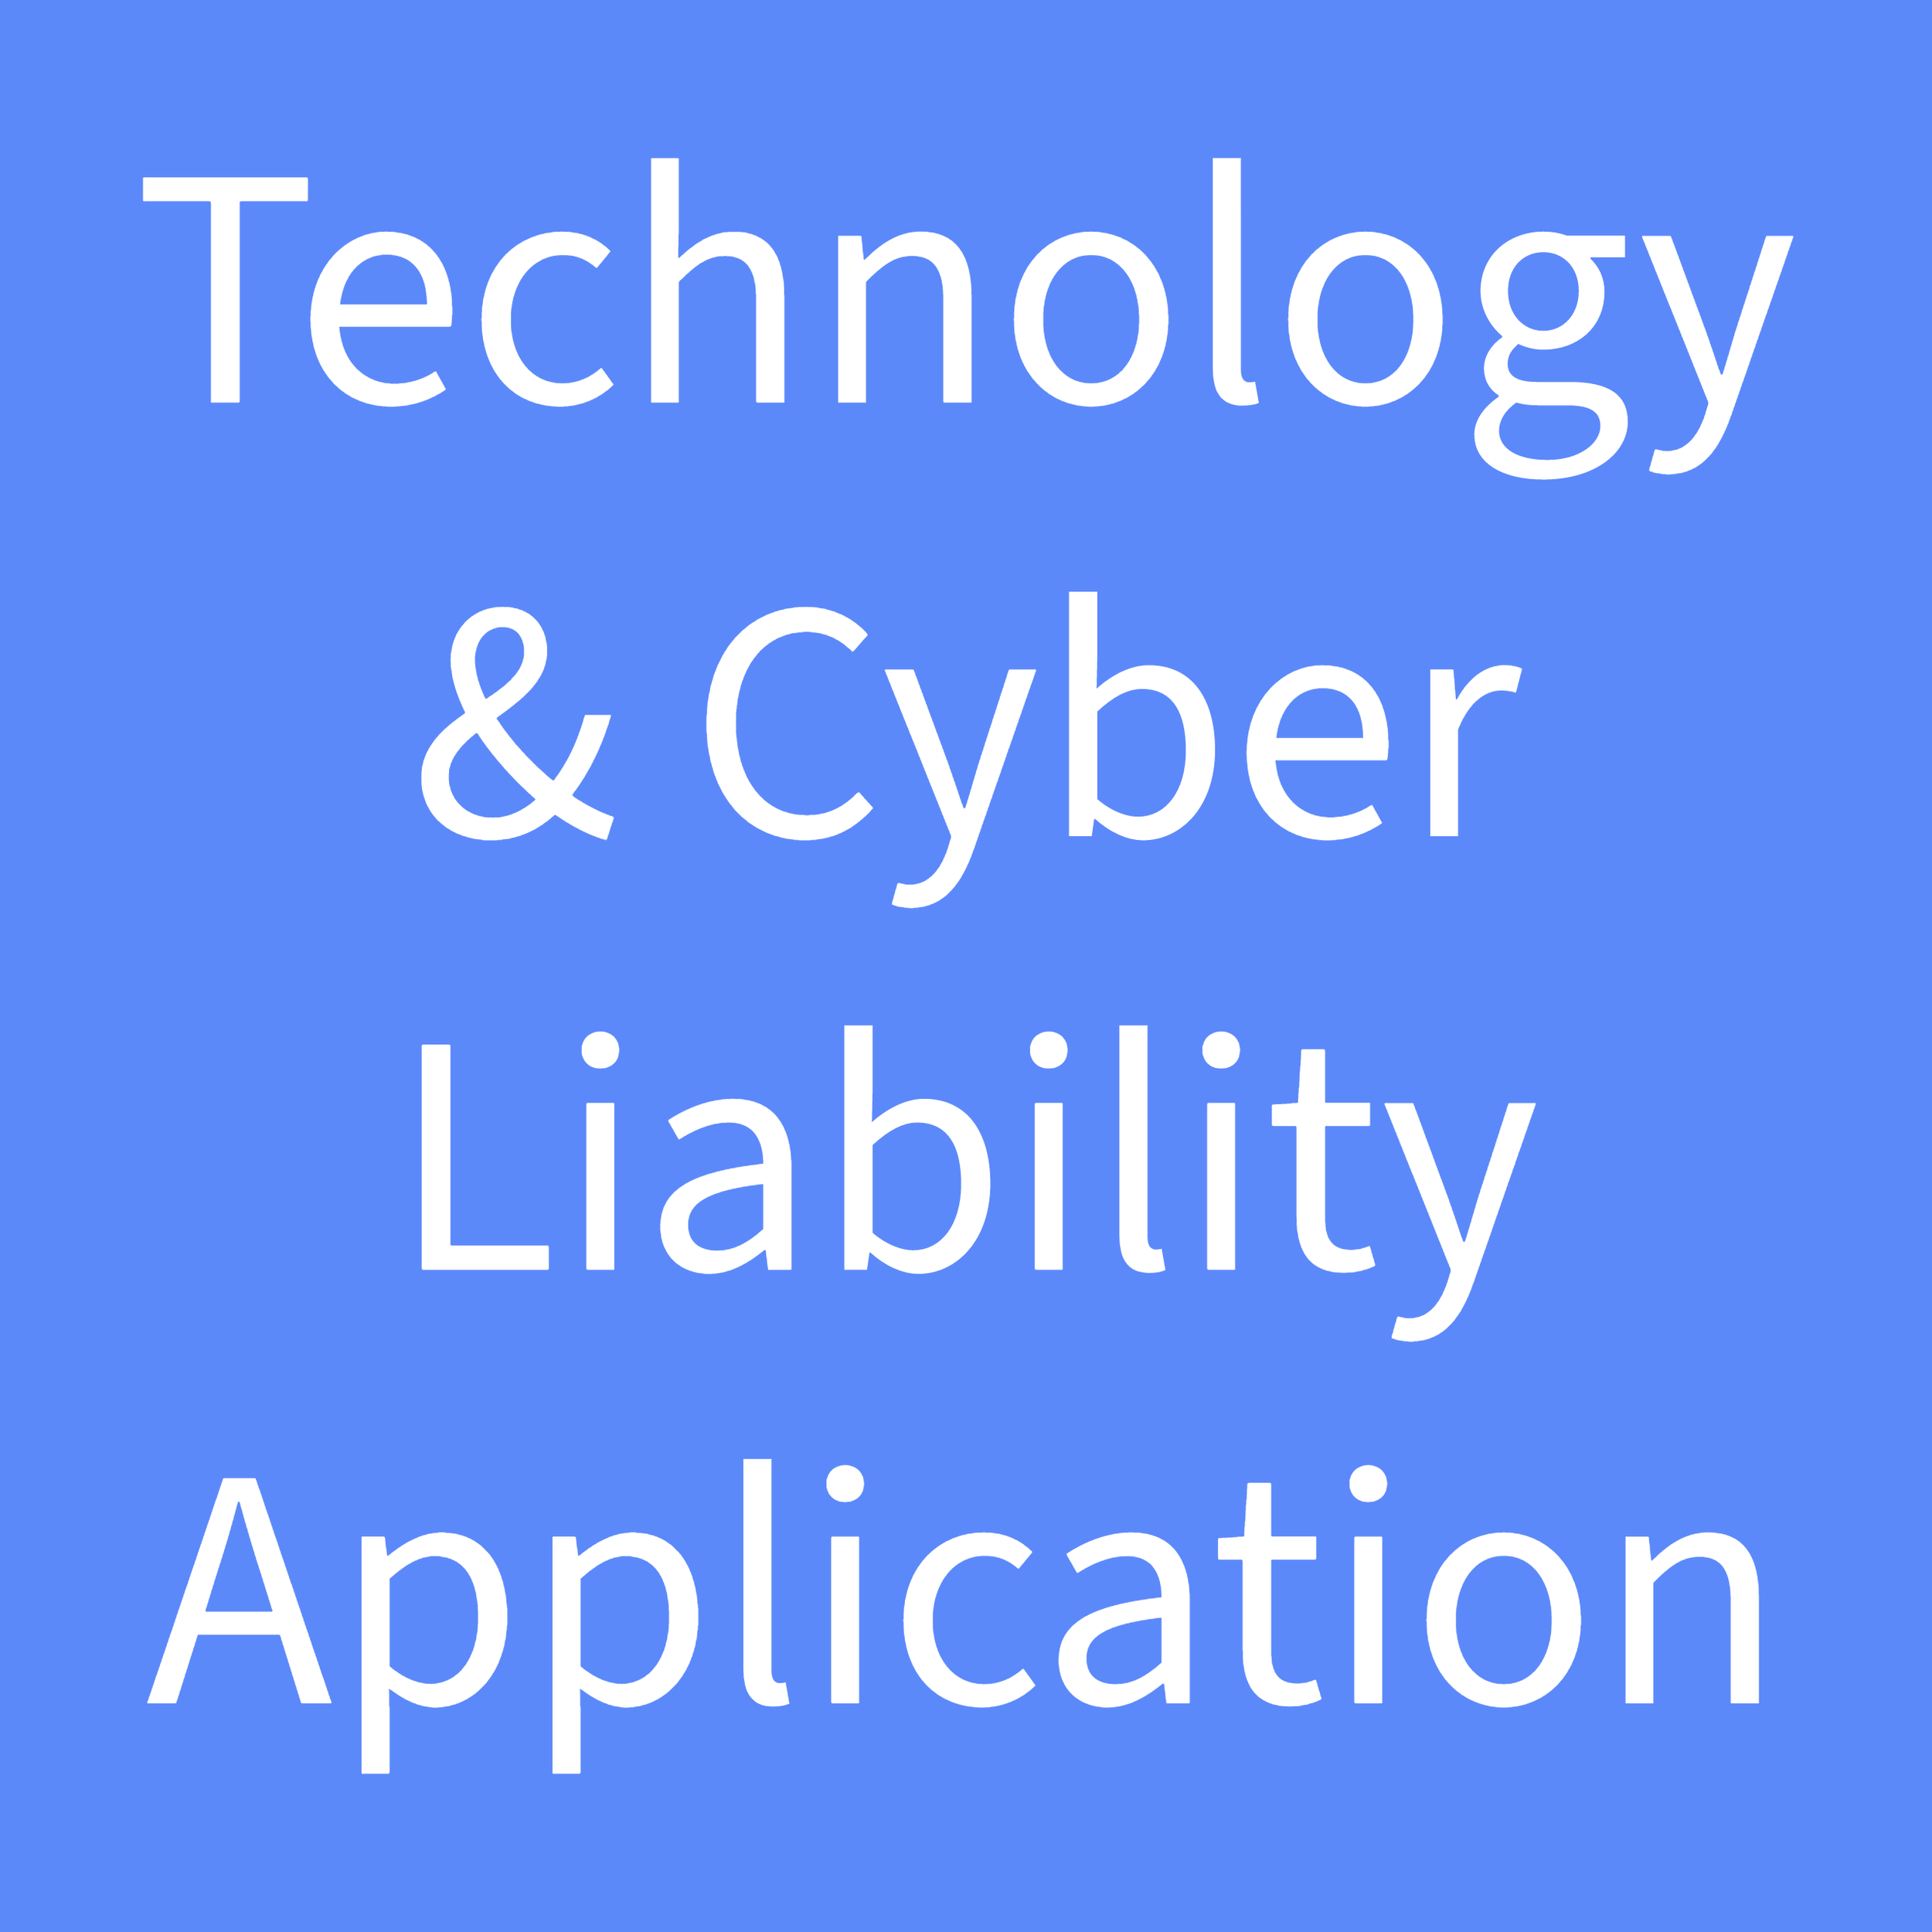 Cyber-Network Security & Privacy Liability & Technology Risks-2-Technology & Cyber Liability Application.png